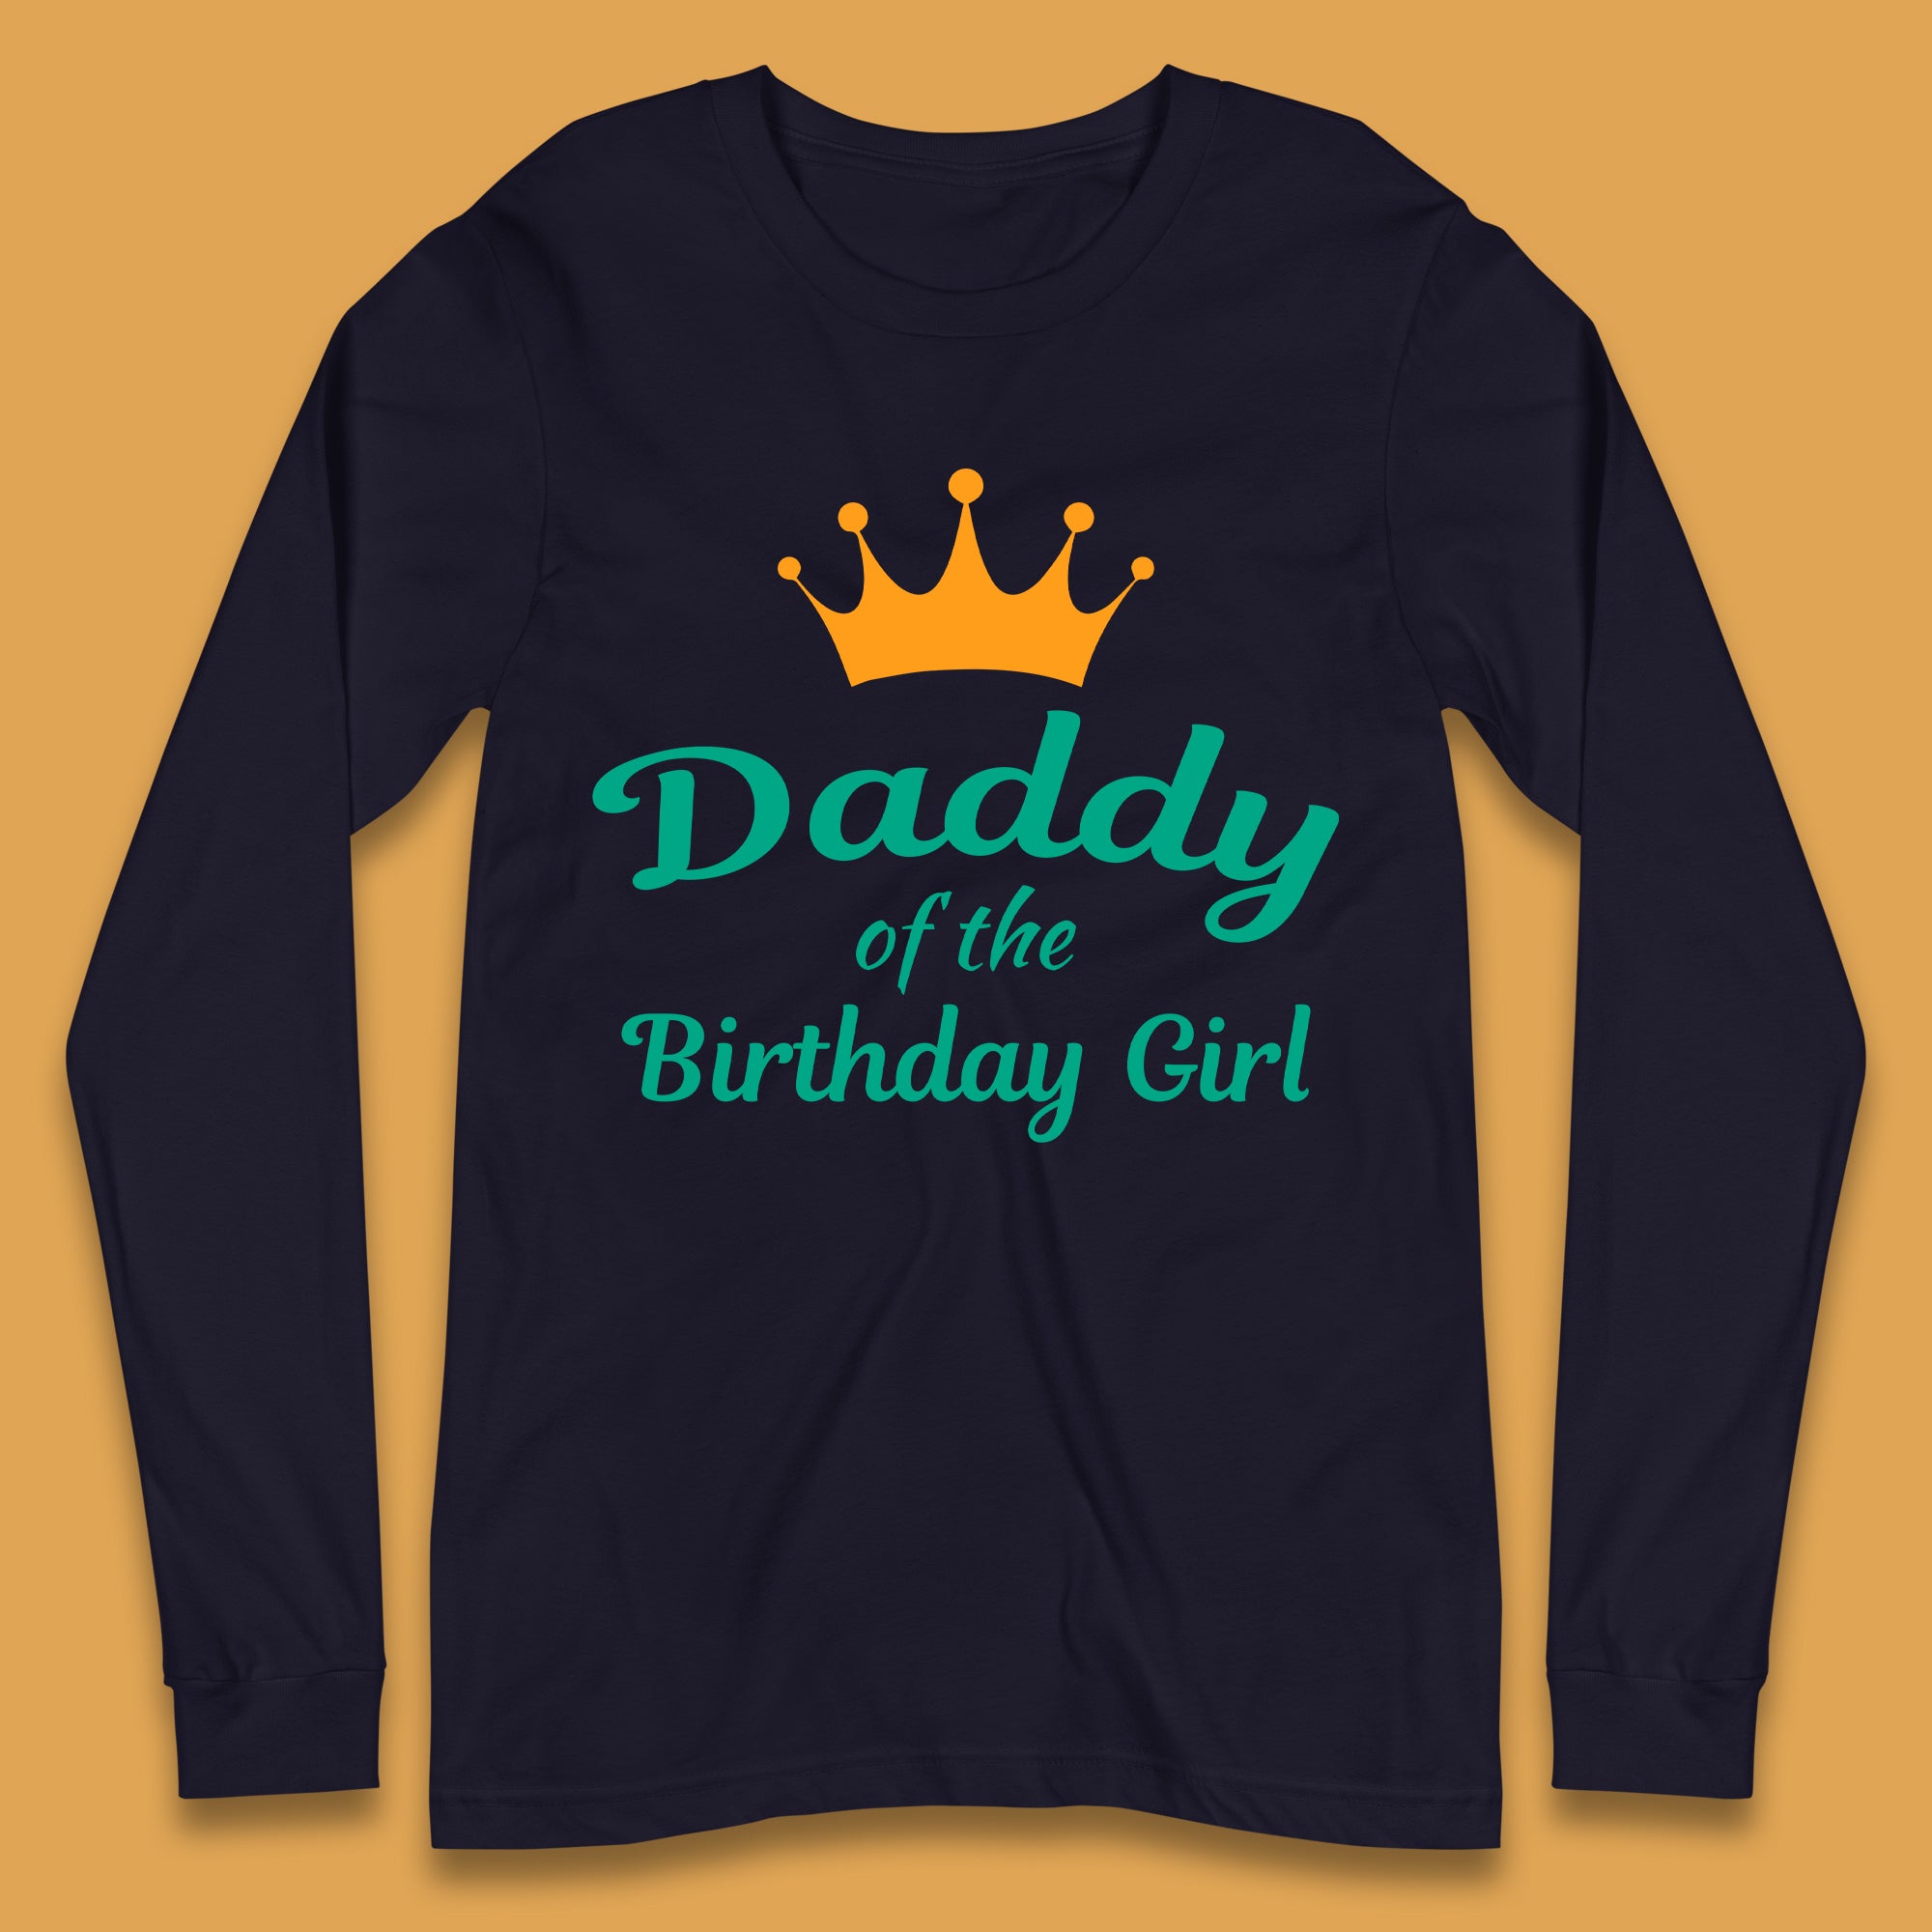 Daddy Of The Birthday Girl Long Sleeve T-Shirt